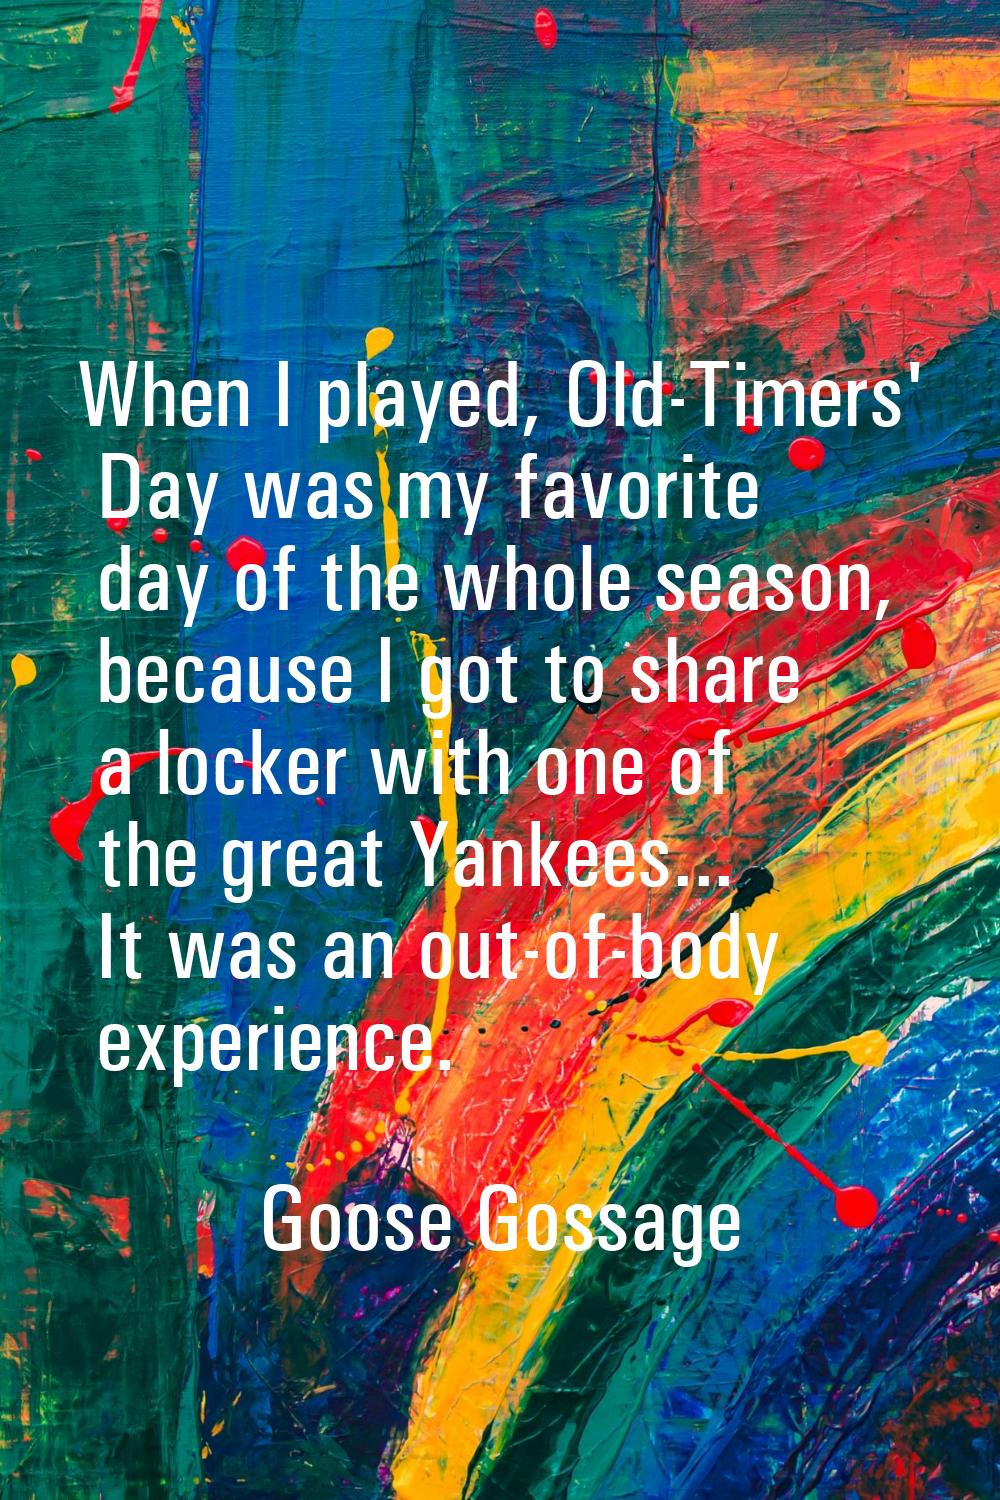 When I played, Old-Timers' Day was my favorite day of the whole season, because I got to share a lo